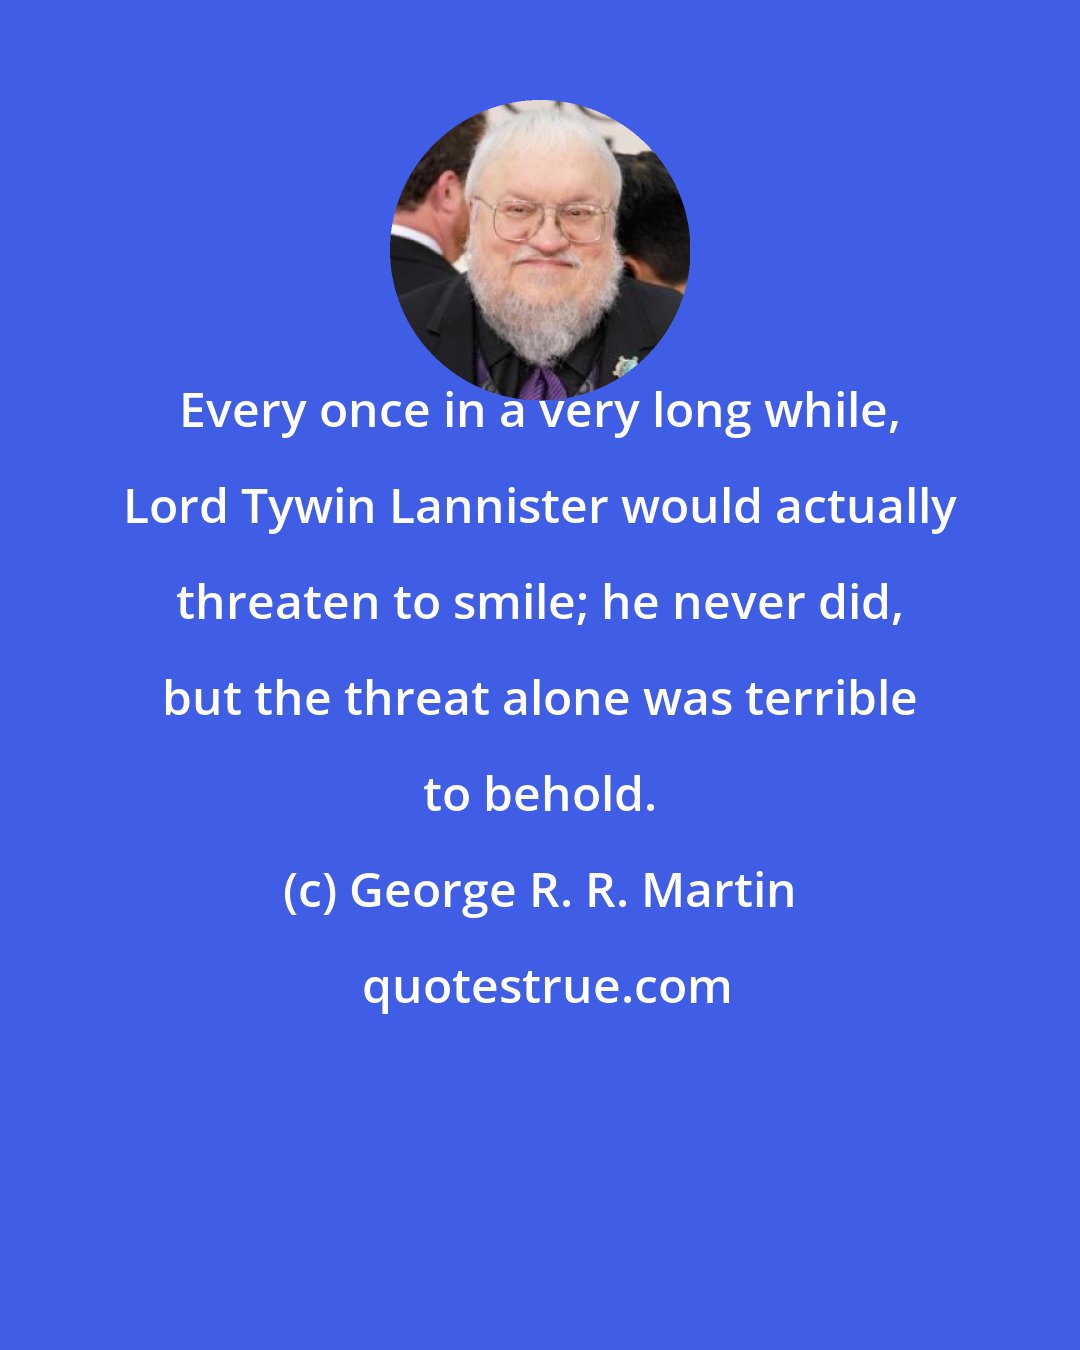 George R. R. Martin: Every once in a very long while, Lord Tywin Lannister would actually threaten to smile; he never did, but the threat alone was terrible to behold.